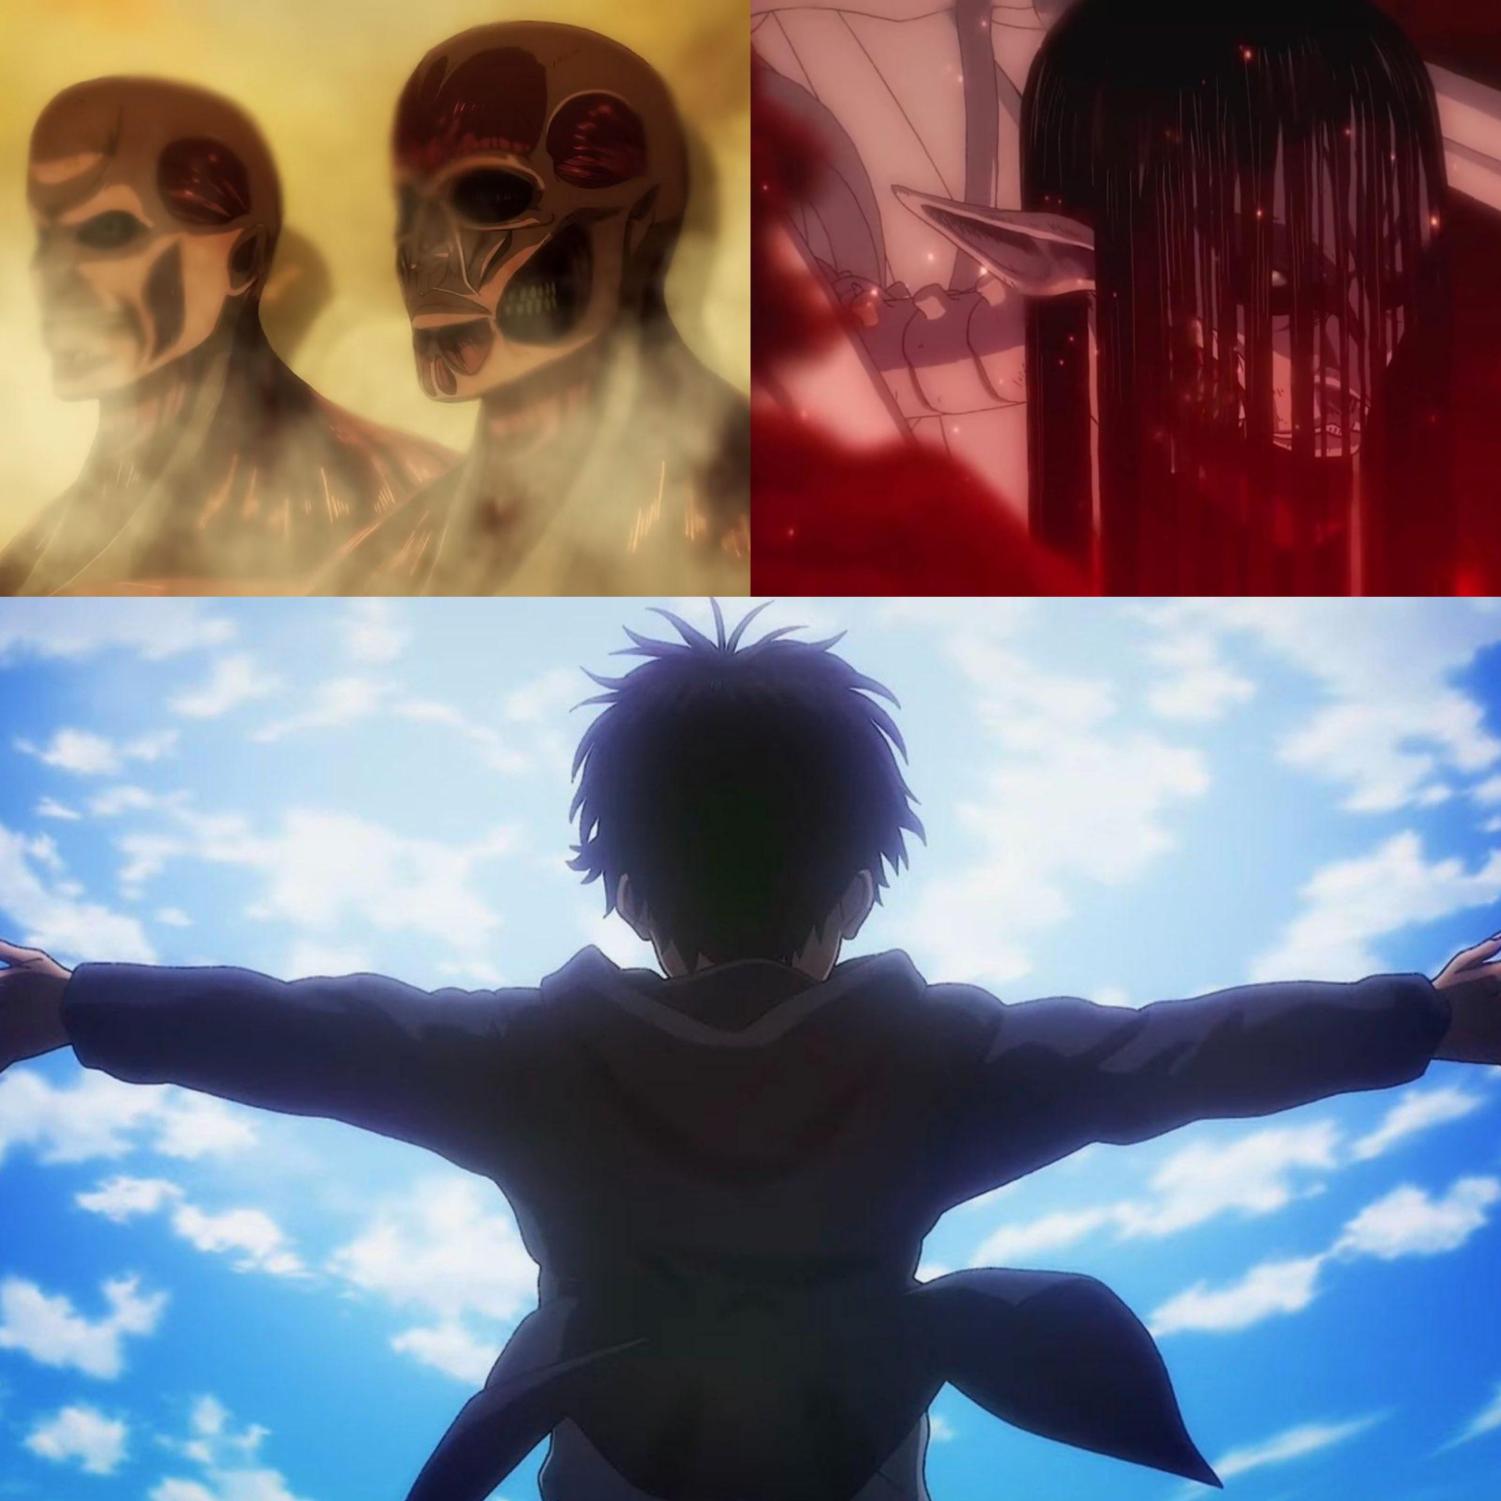 Attack on Titan Final Season THE FINAL CHAPTERS Special 1